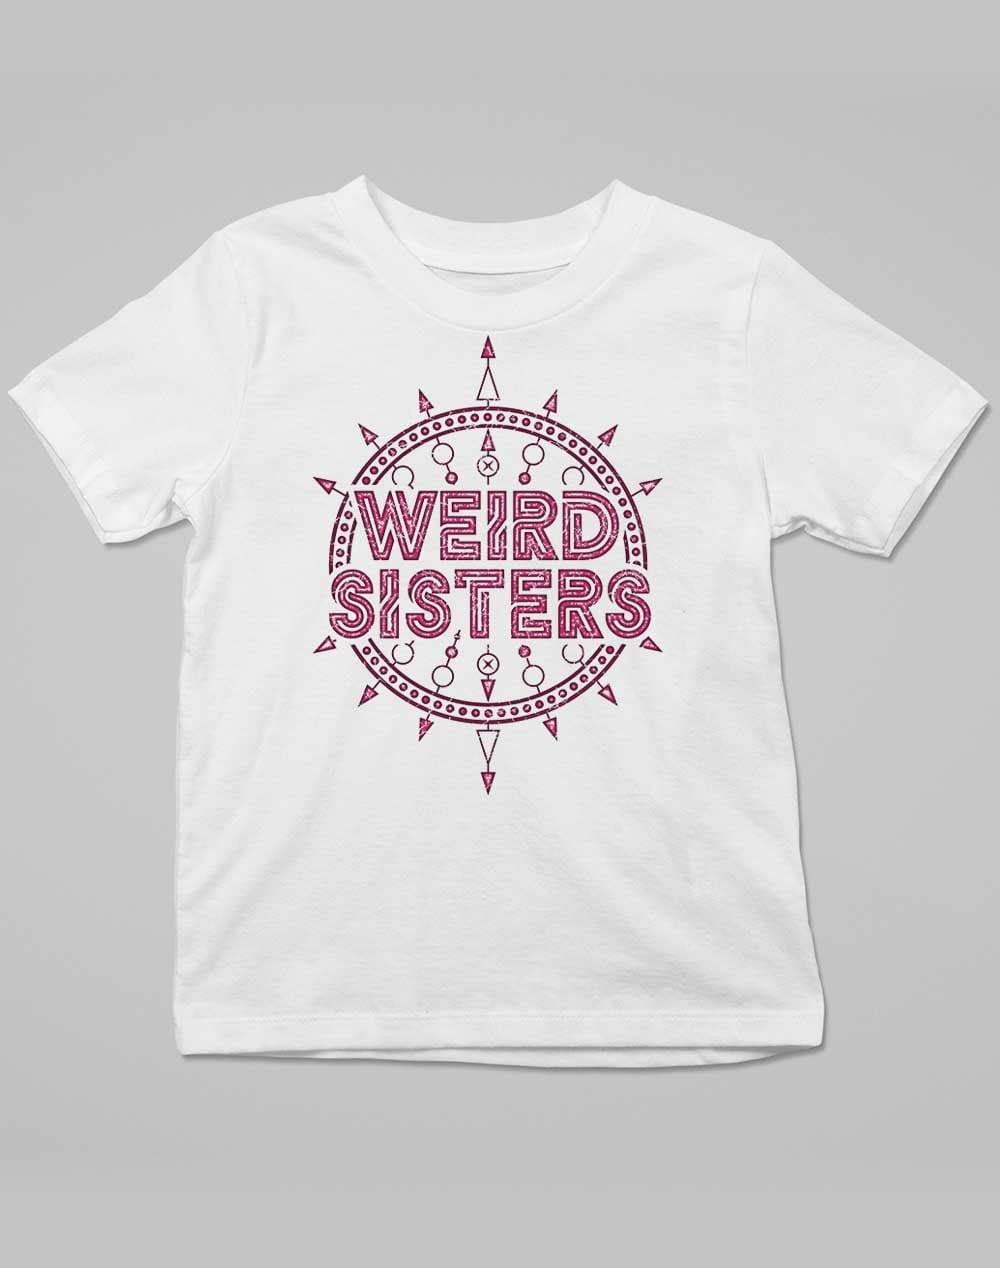 Weird Sisters Band Logo Kids T-Shirt 3-4 years / White  - Off World Tees